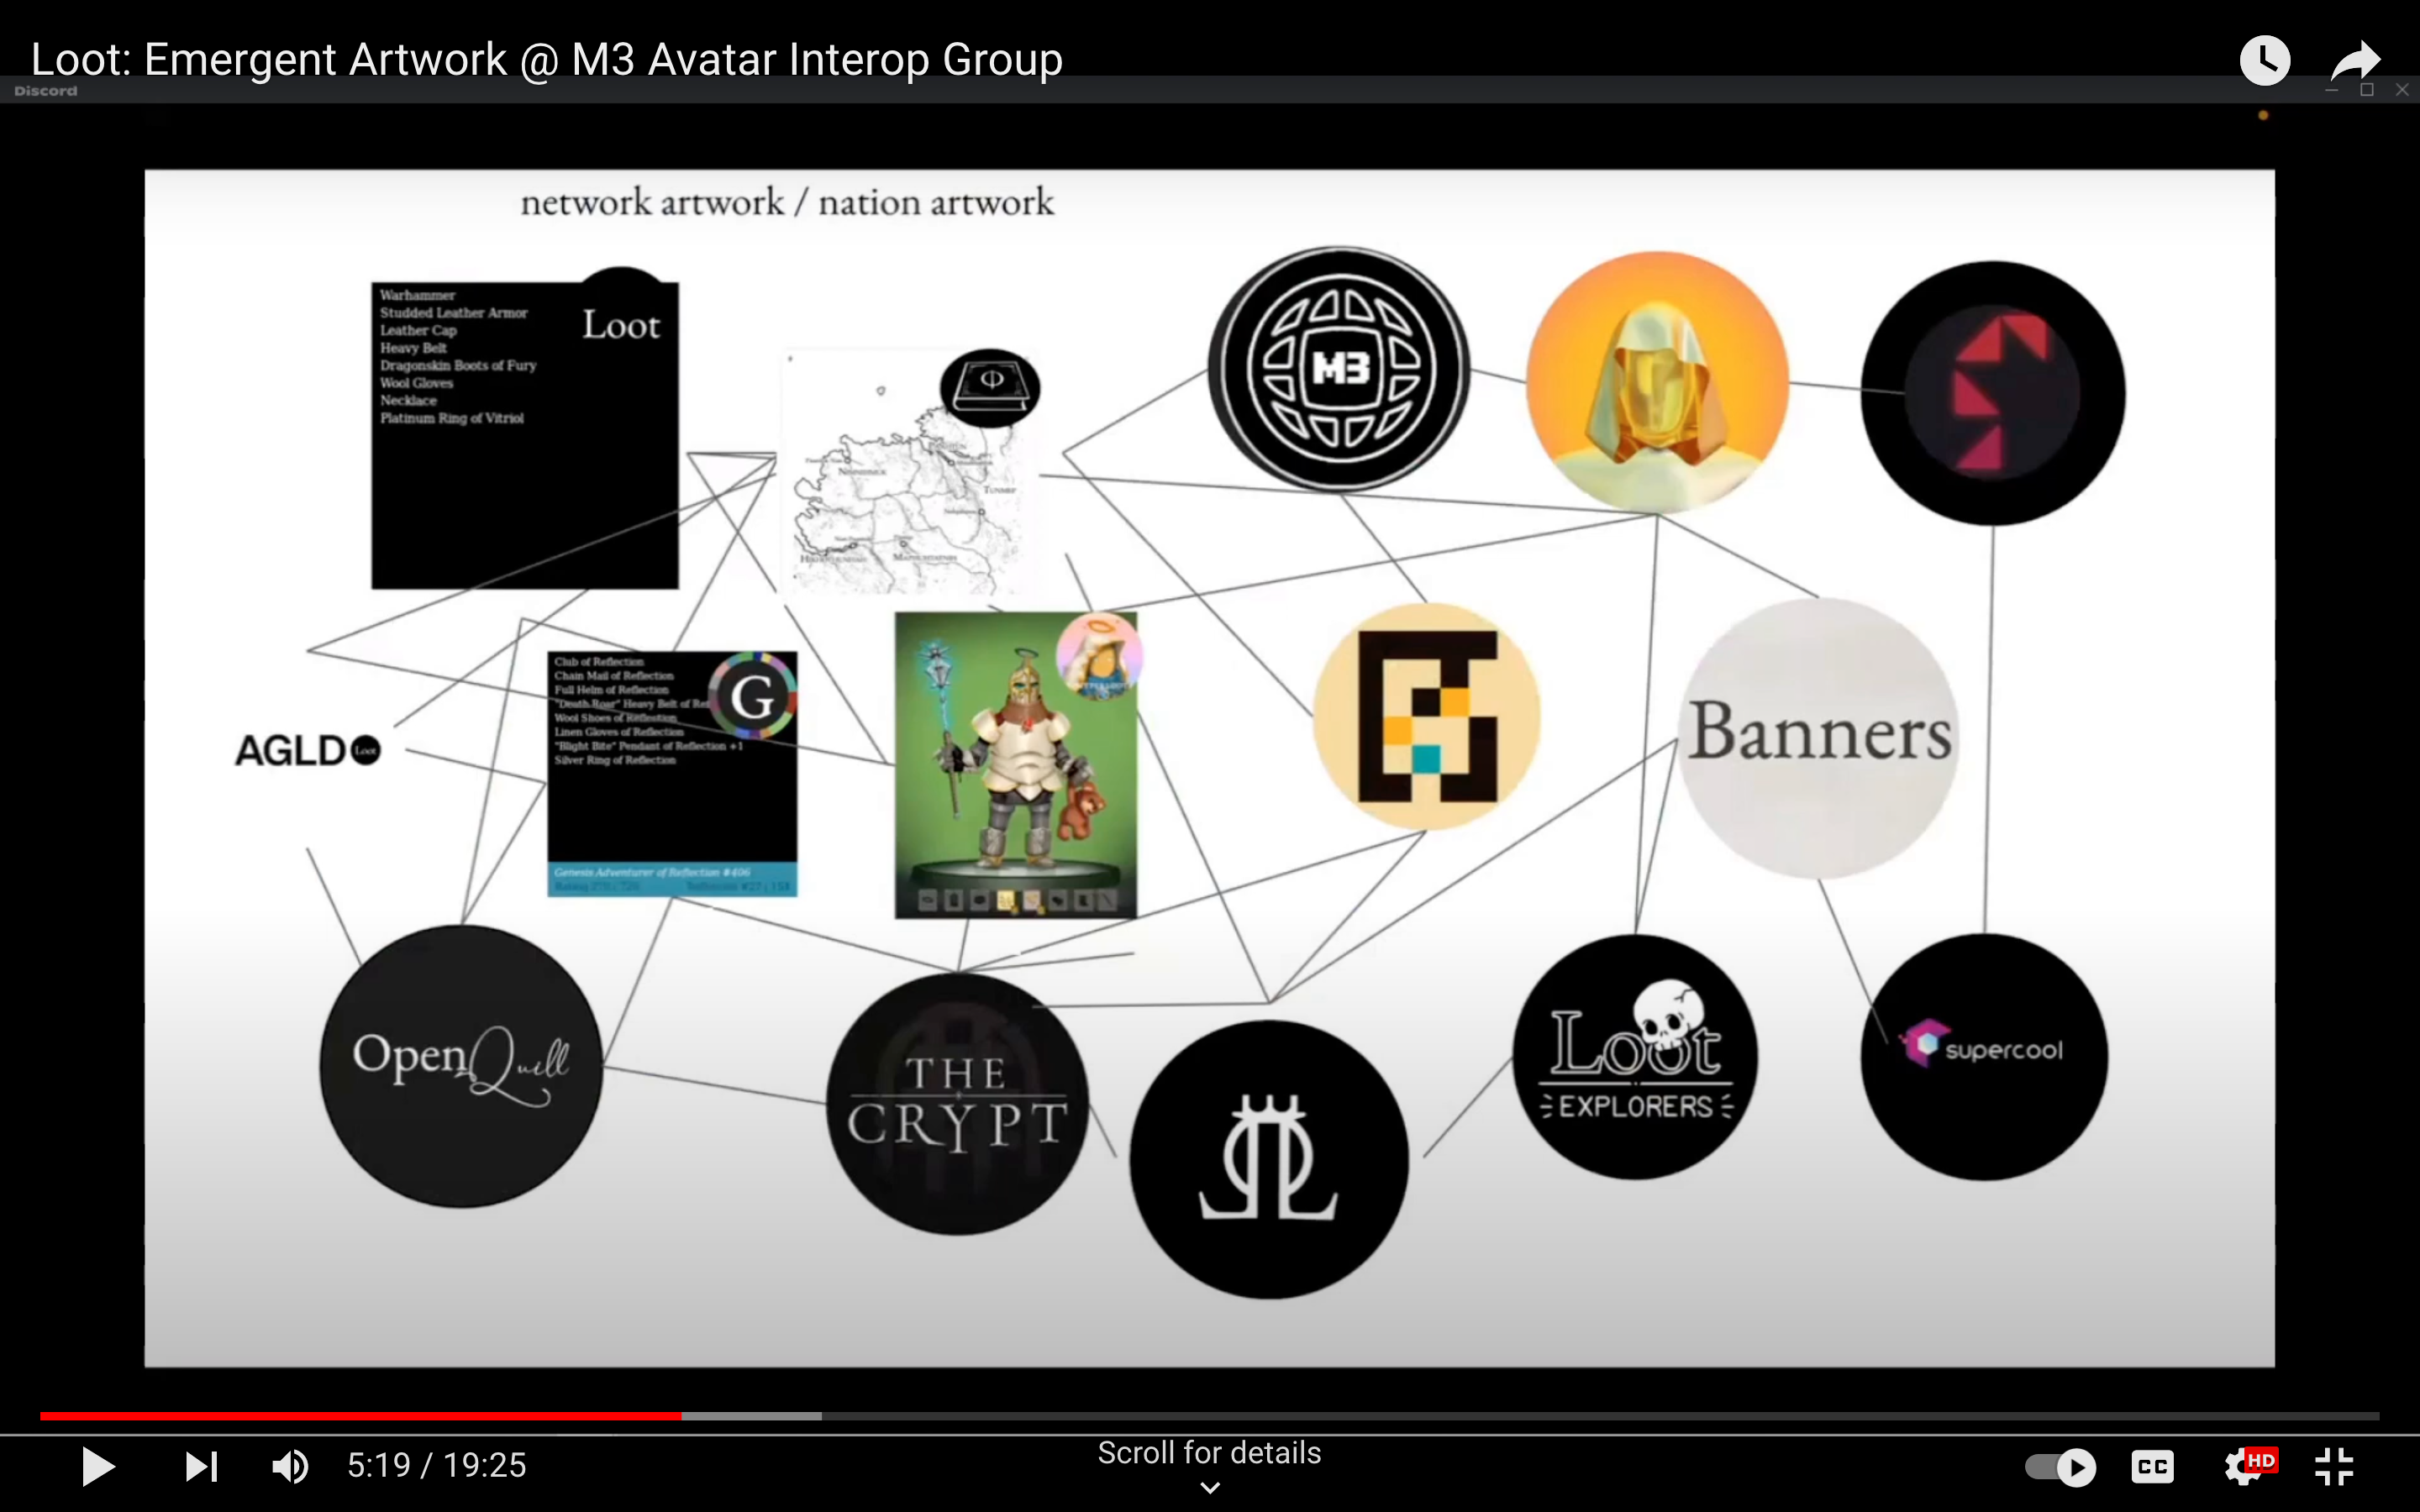 A look at the interconnected ways that different DAOs and groups within the Lootverse are building out this emergent art ecosystem. Via: https://www.youtube.com/watch?v=d6VZxNFF4DA 